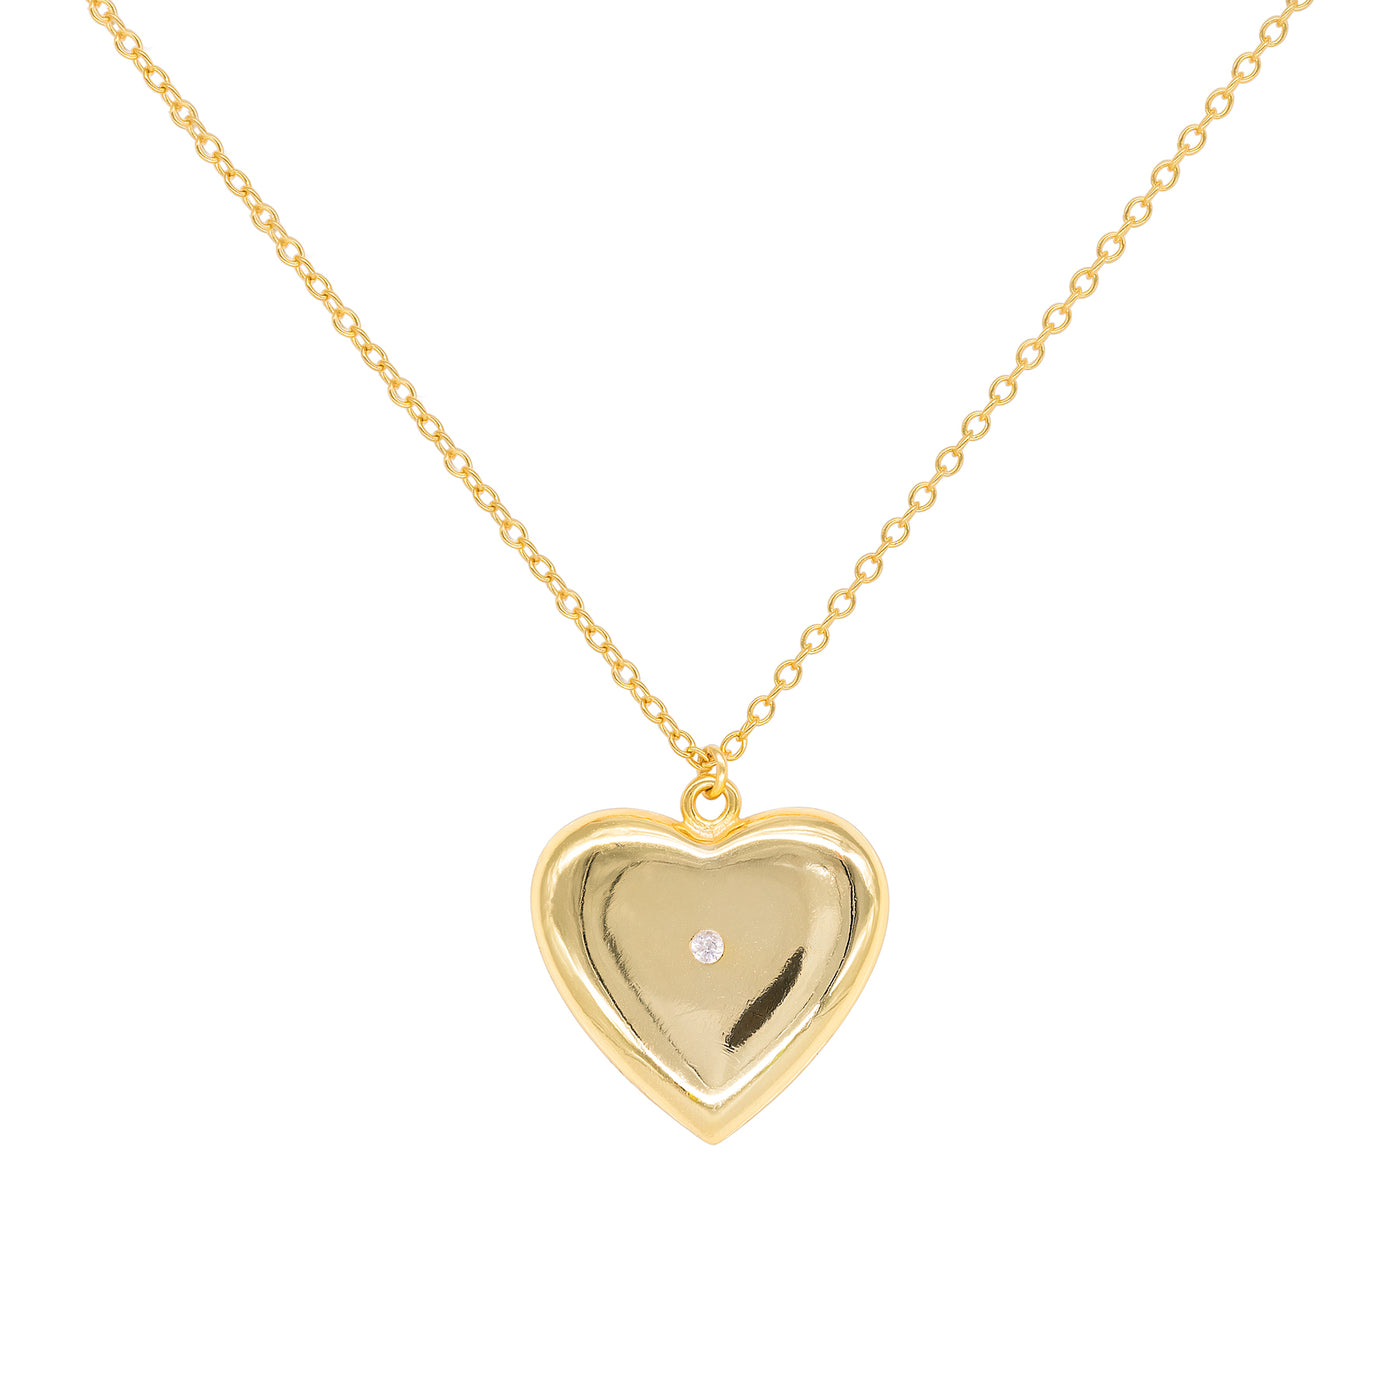 Shine Heart Necklace